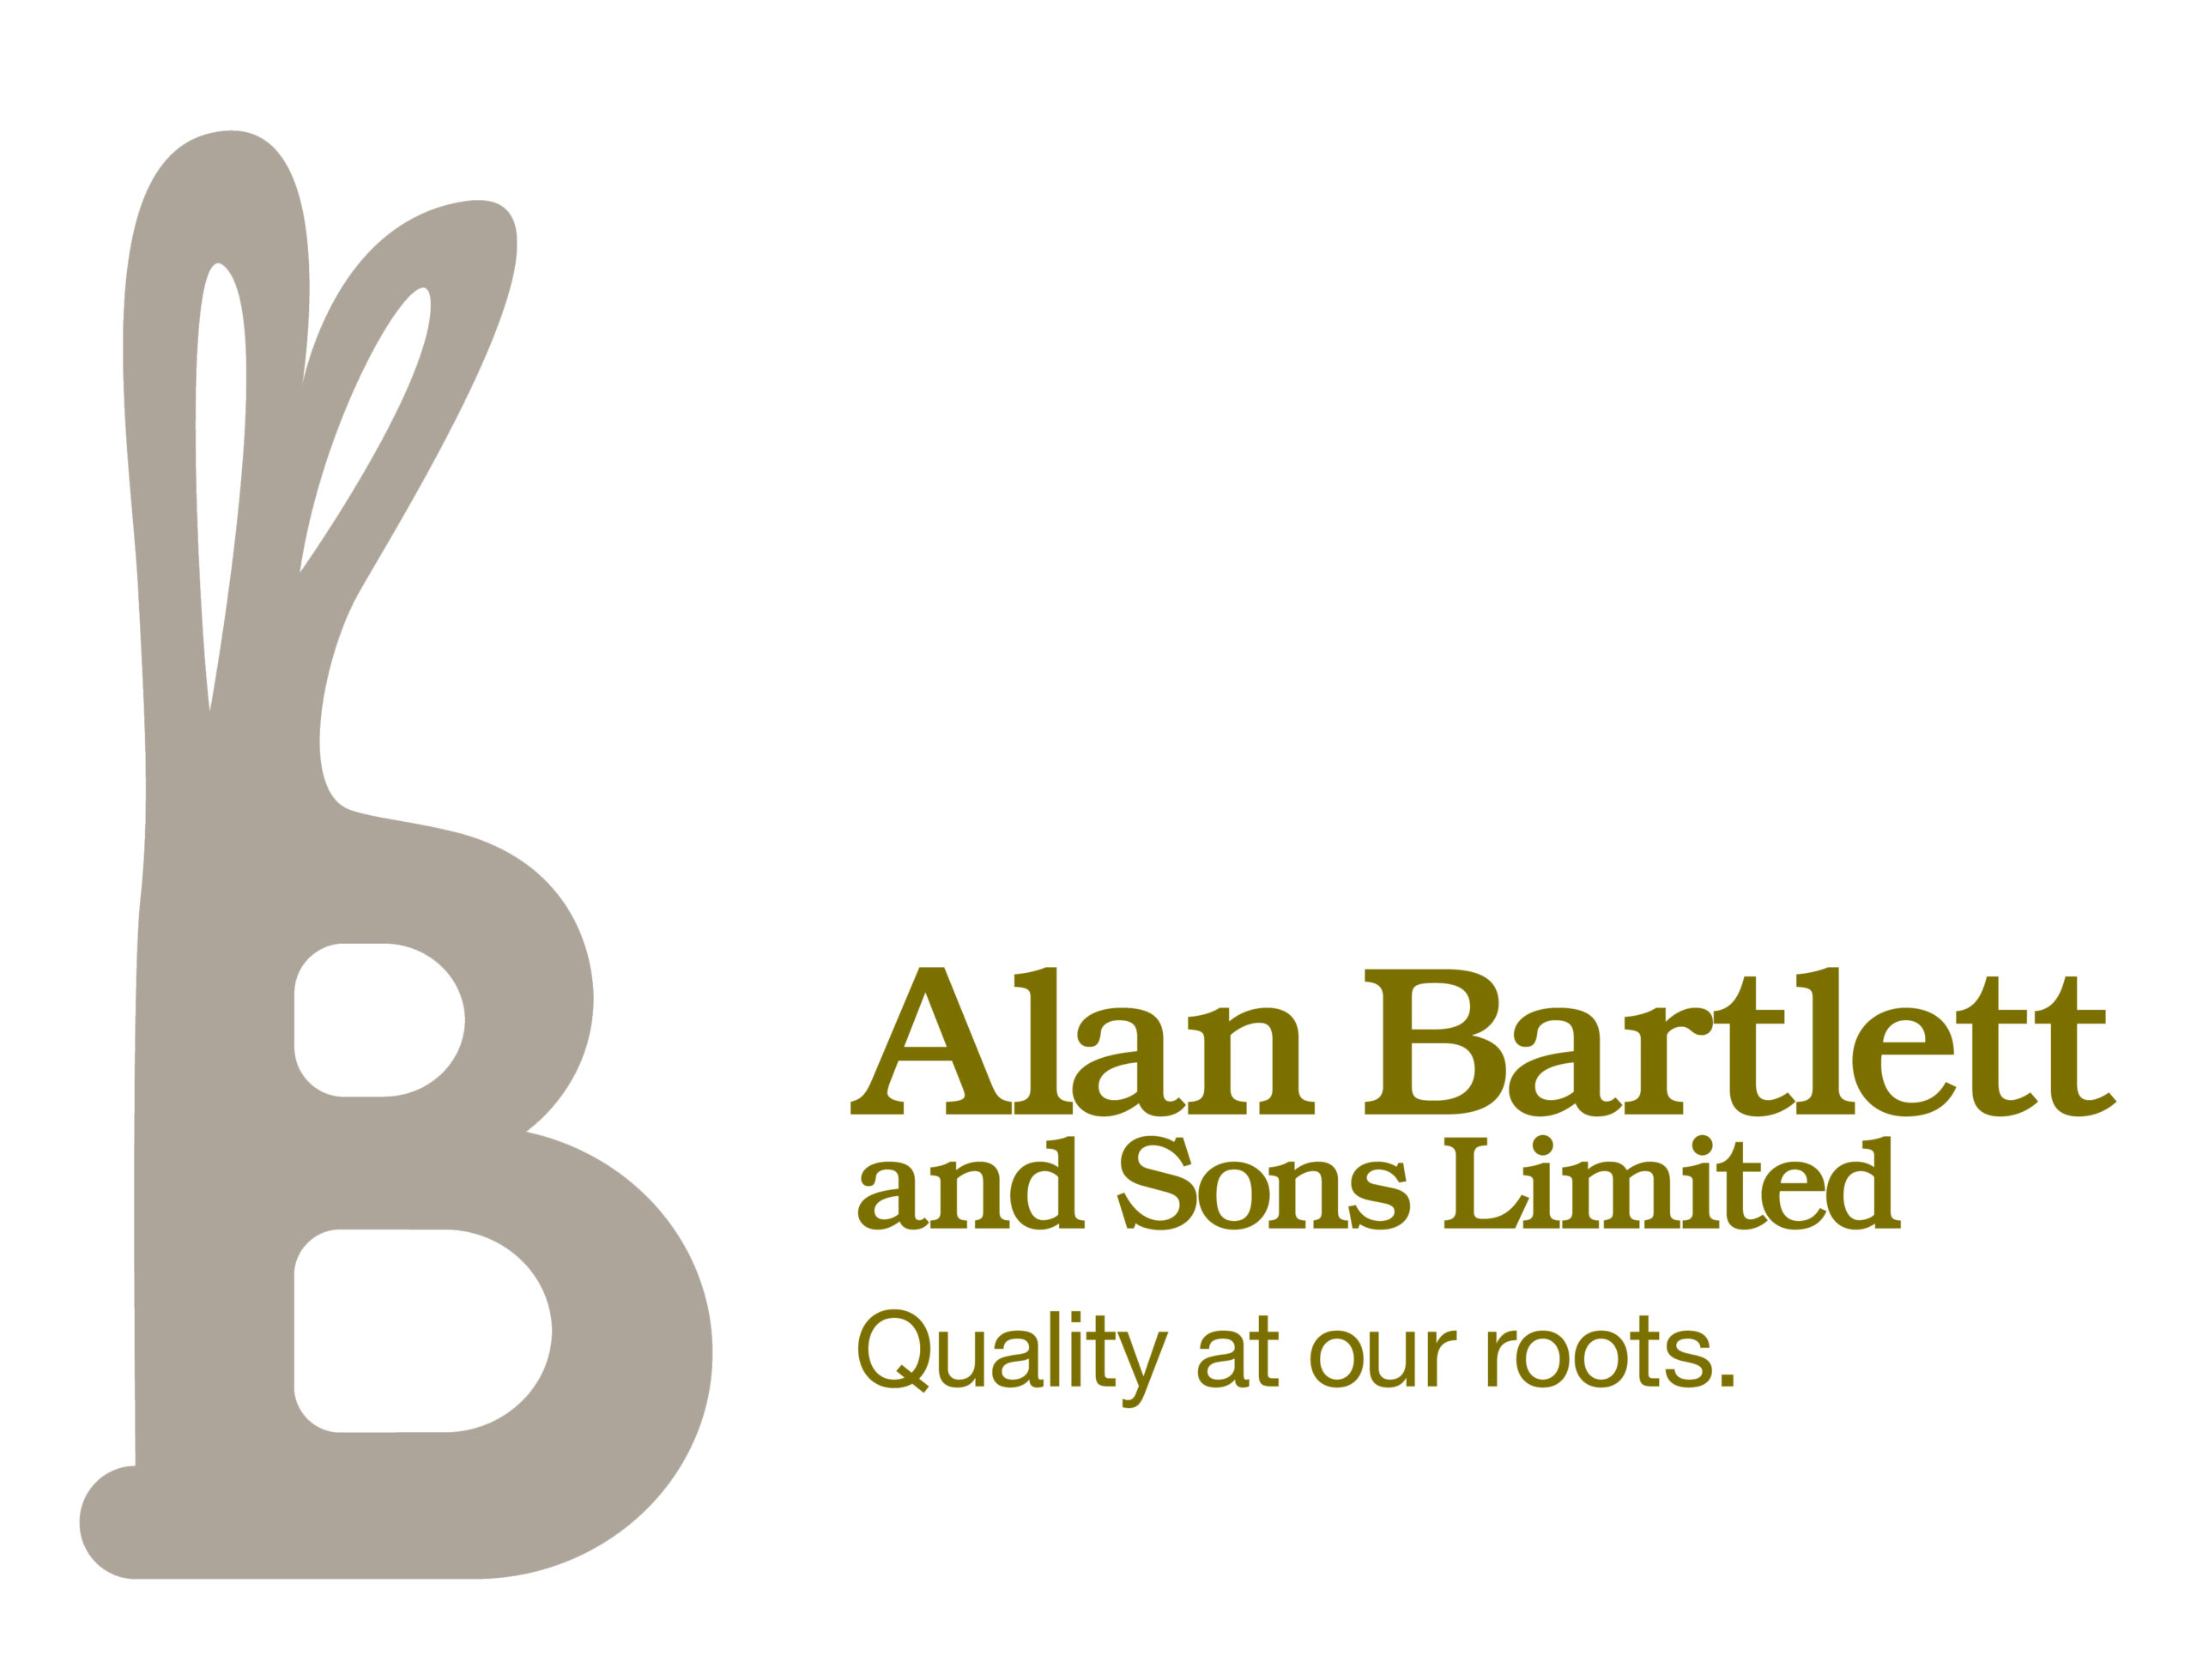 Alan Bartlett and Sons